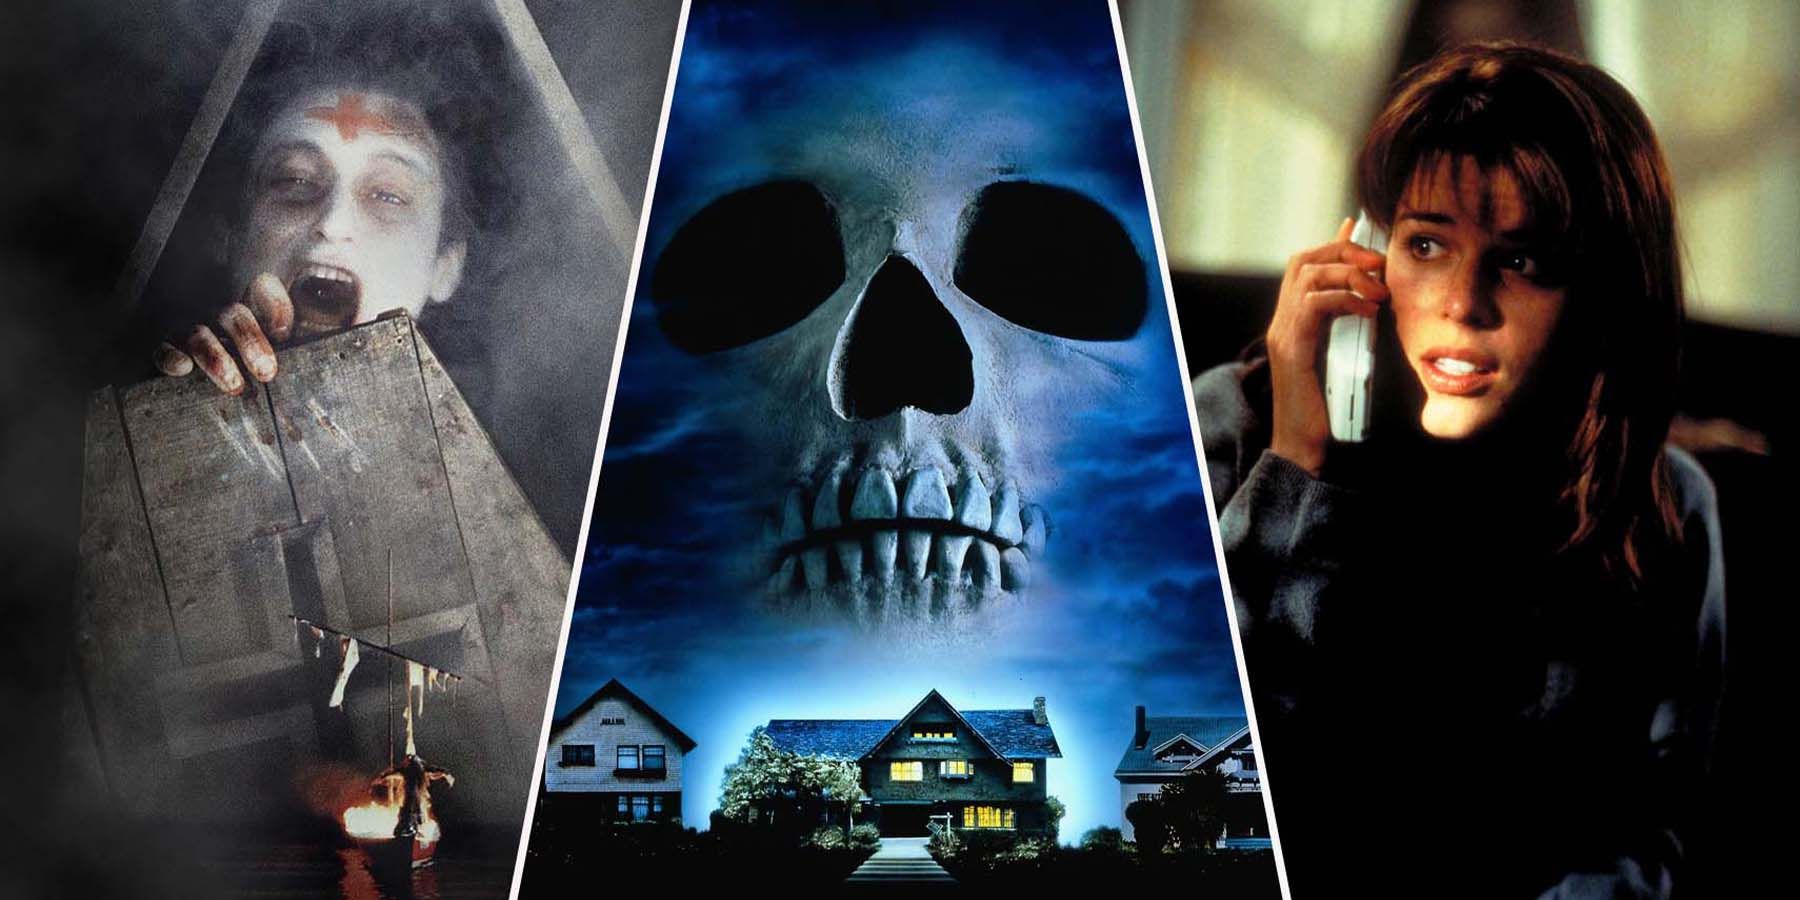 Scream Best Wes Craven Horror Movies, Ranked featured image